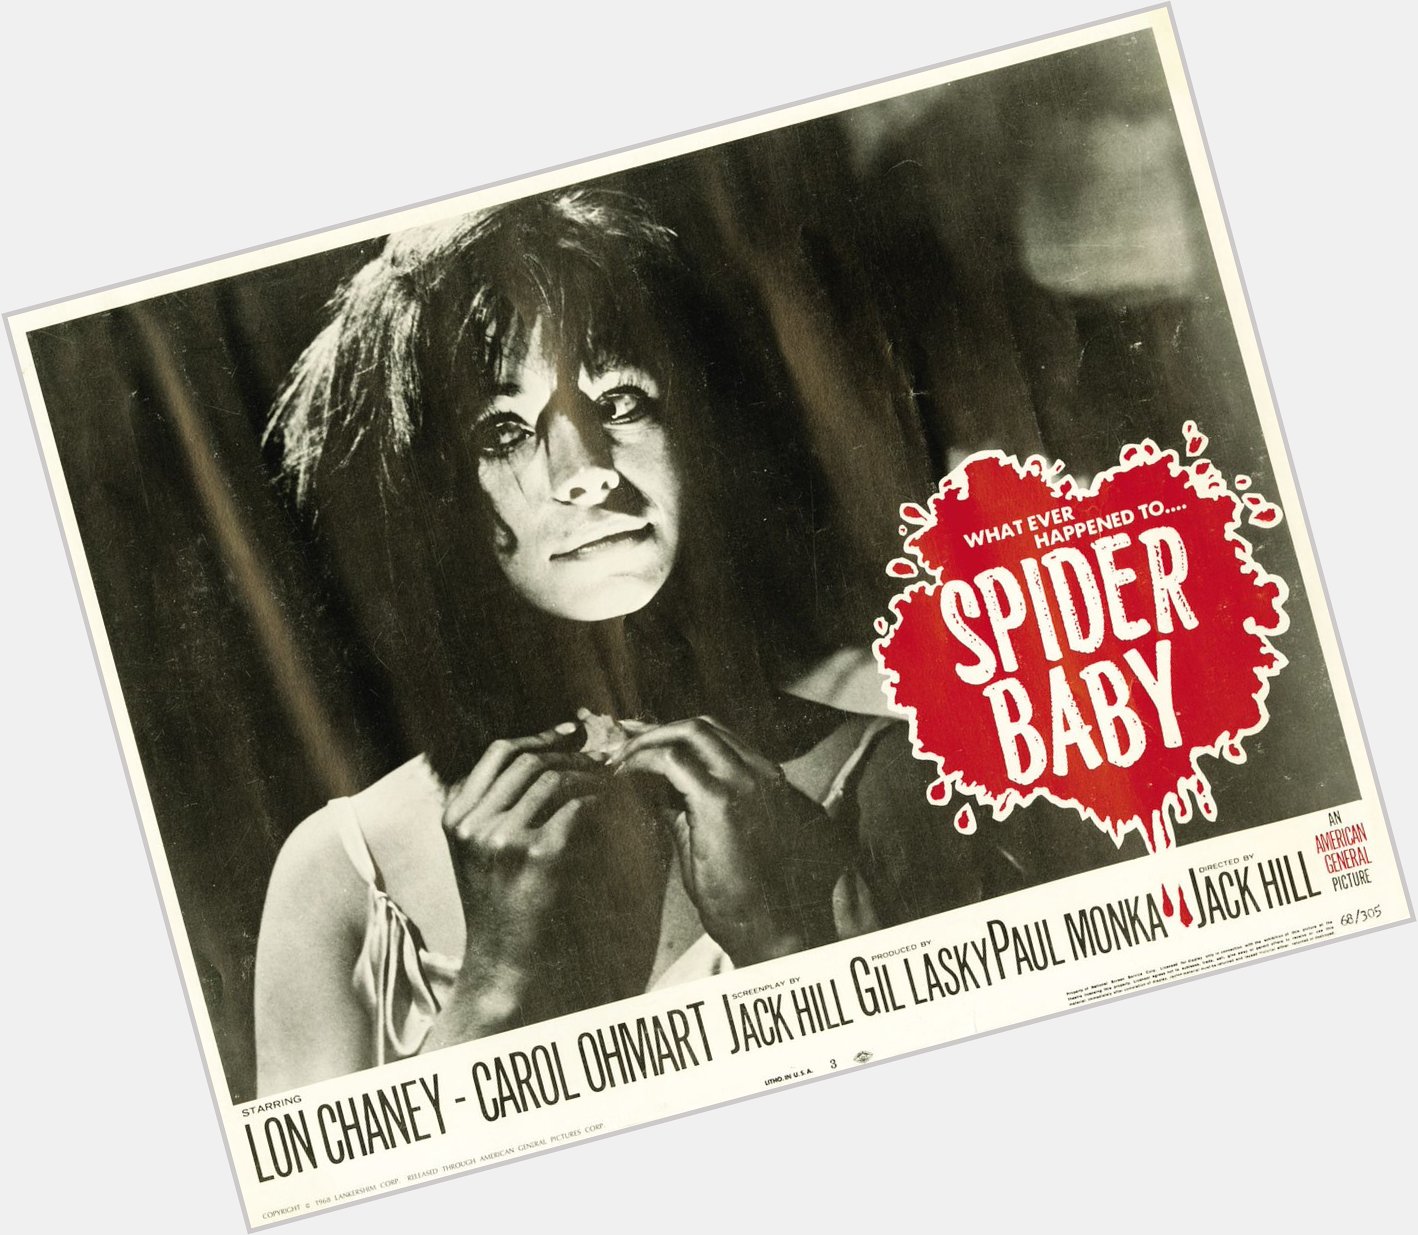  Spider Baby or, The Maddest Story Ever Told    Jack Hill Happy Birthday January 28 1933 